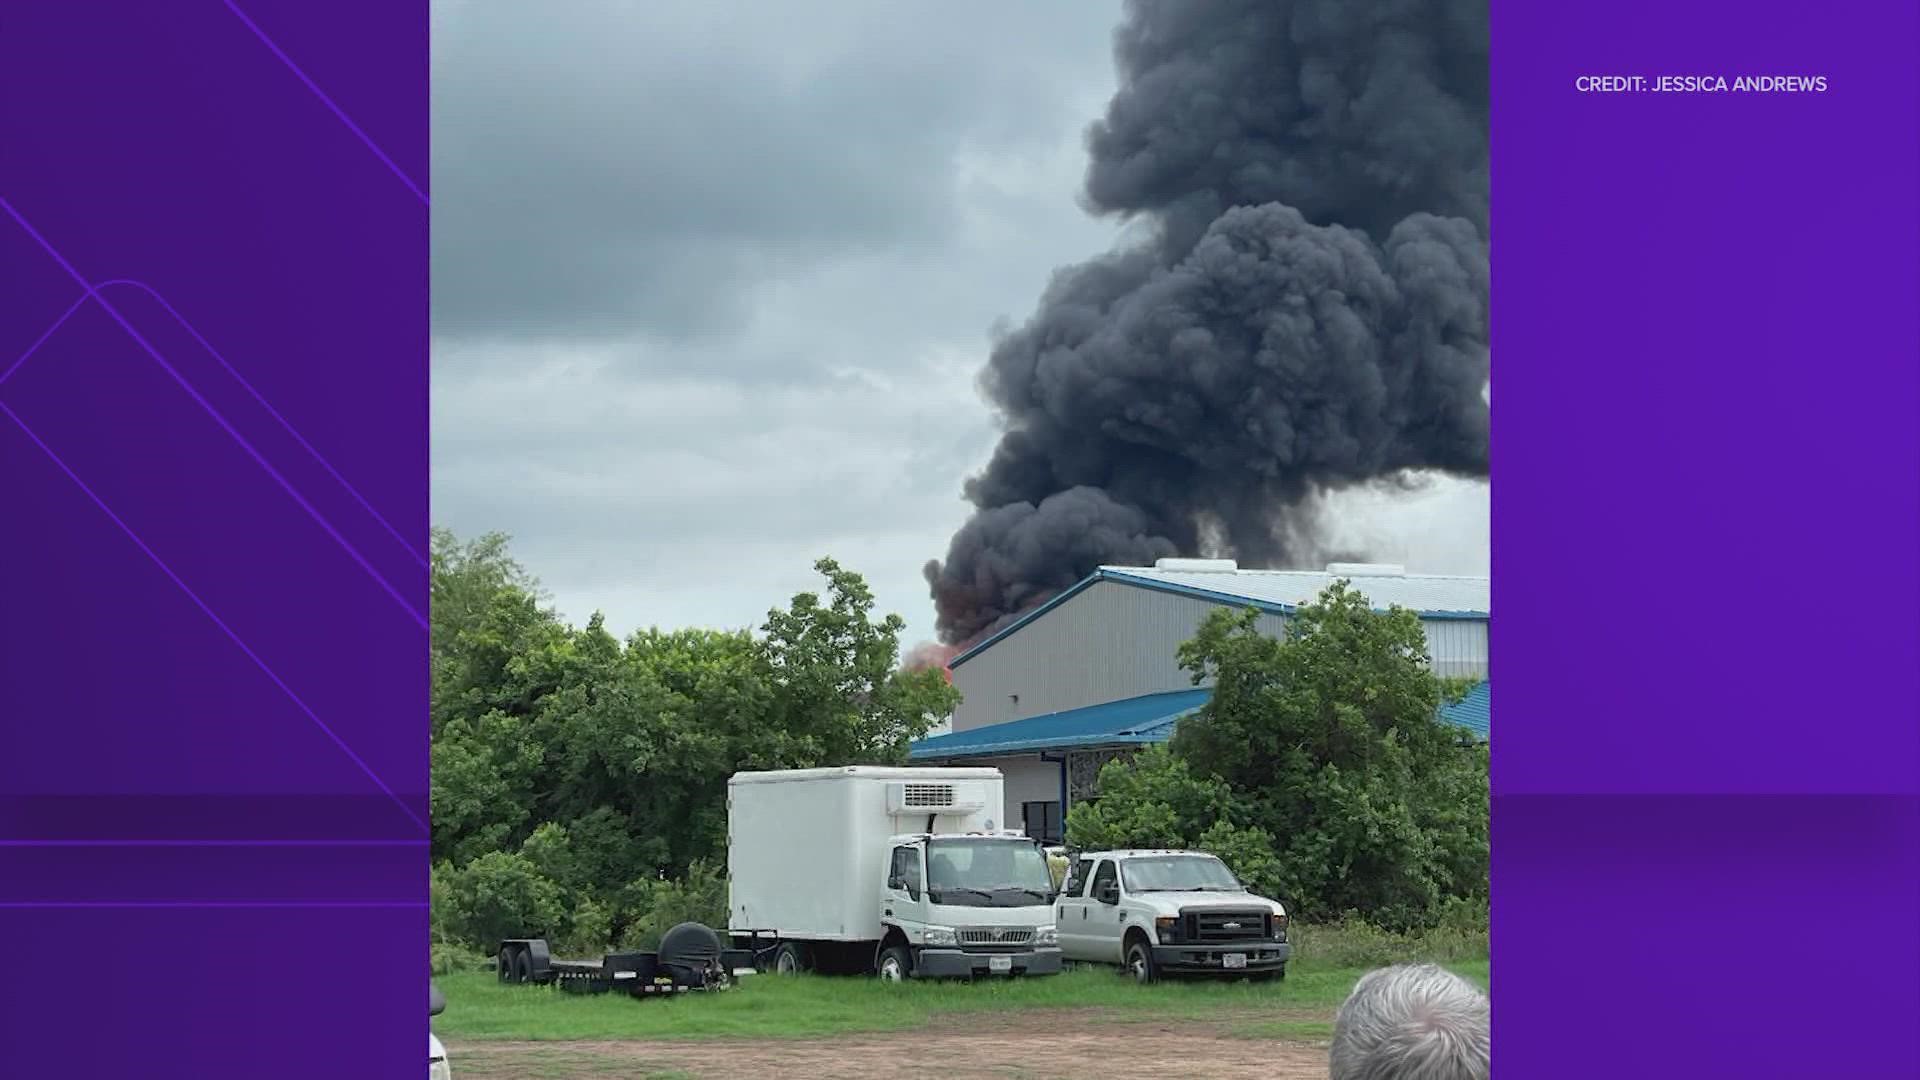 Firefighters battled a silo fire in northwest Harris County Tuesday, August 30 near Tomball. The cause of the fire is unknown.